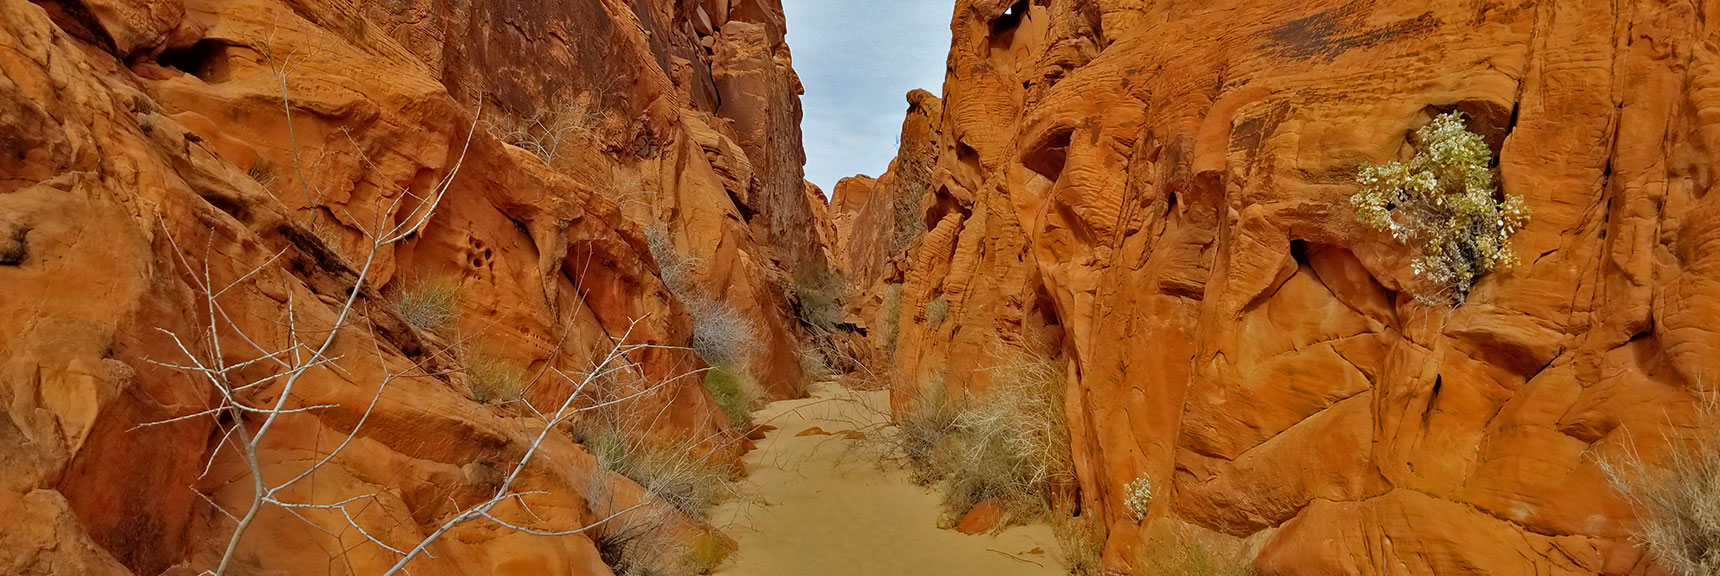 The Canyon Narrows in Fire Canyon in Valley of Fire State Park, Nevada